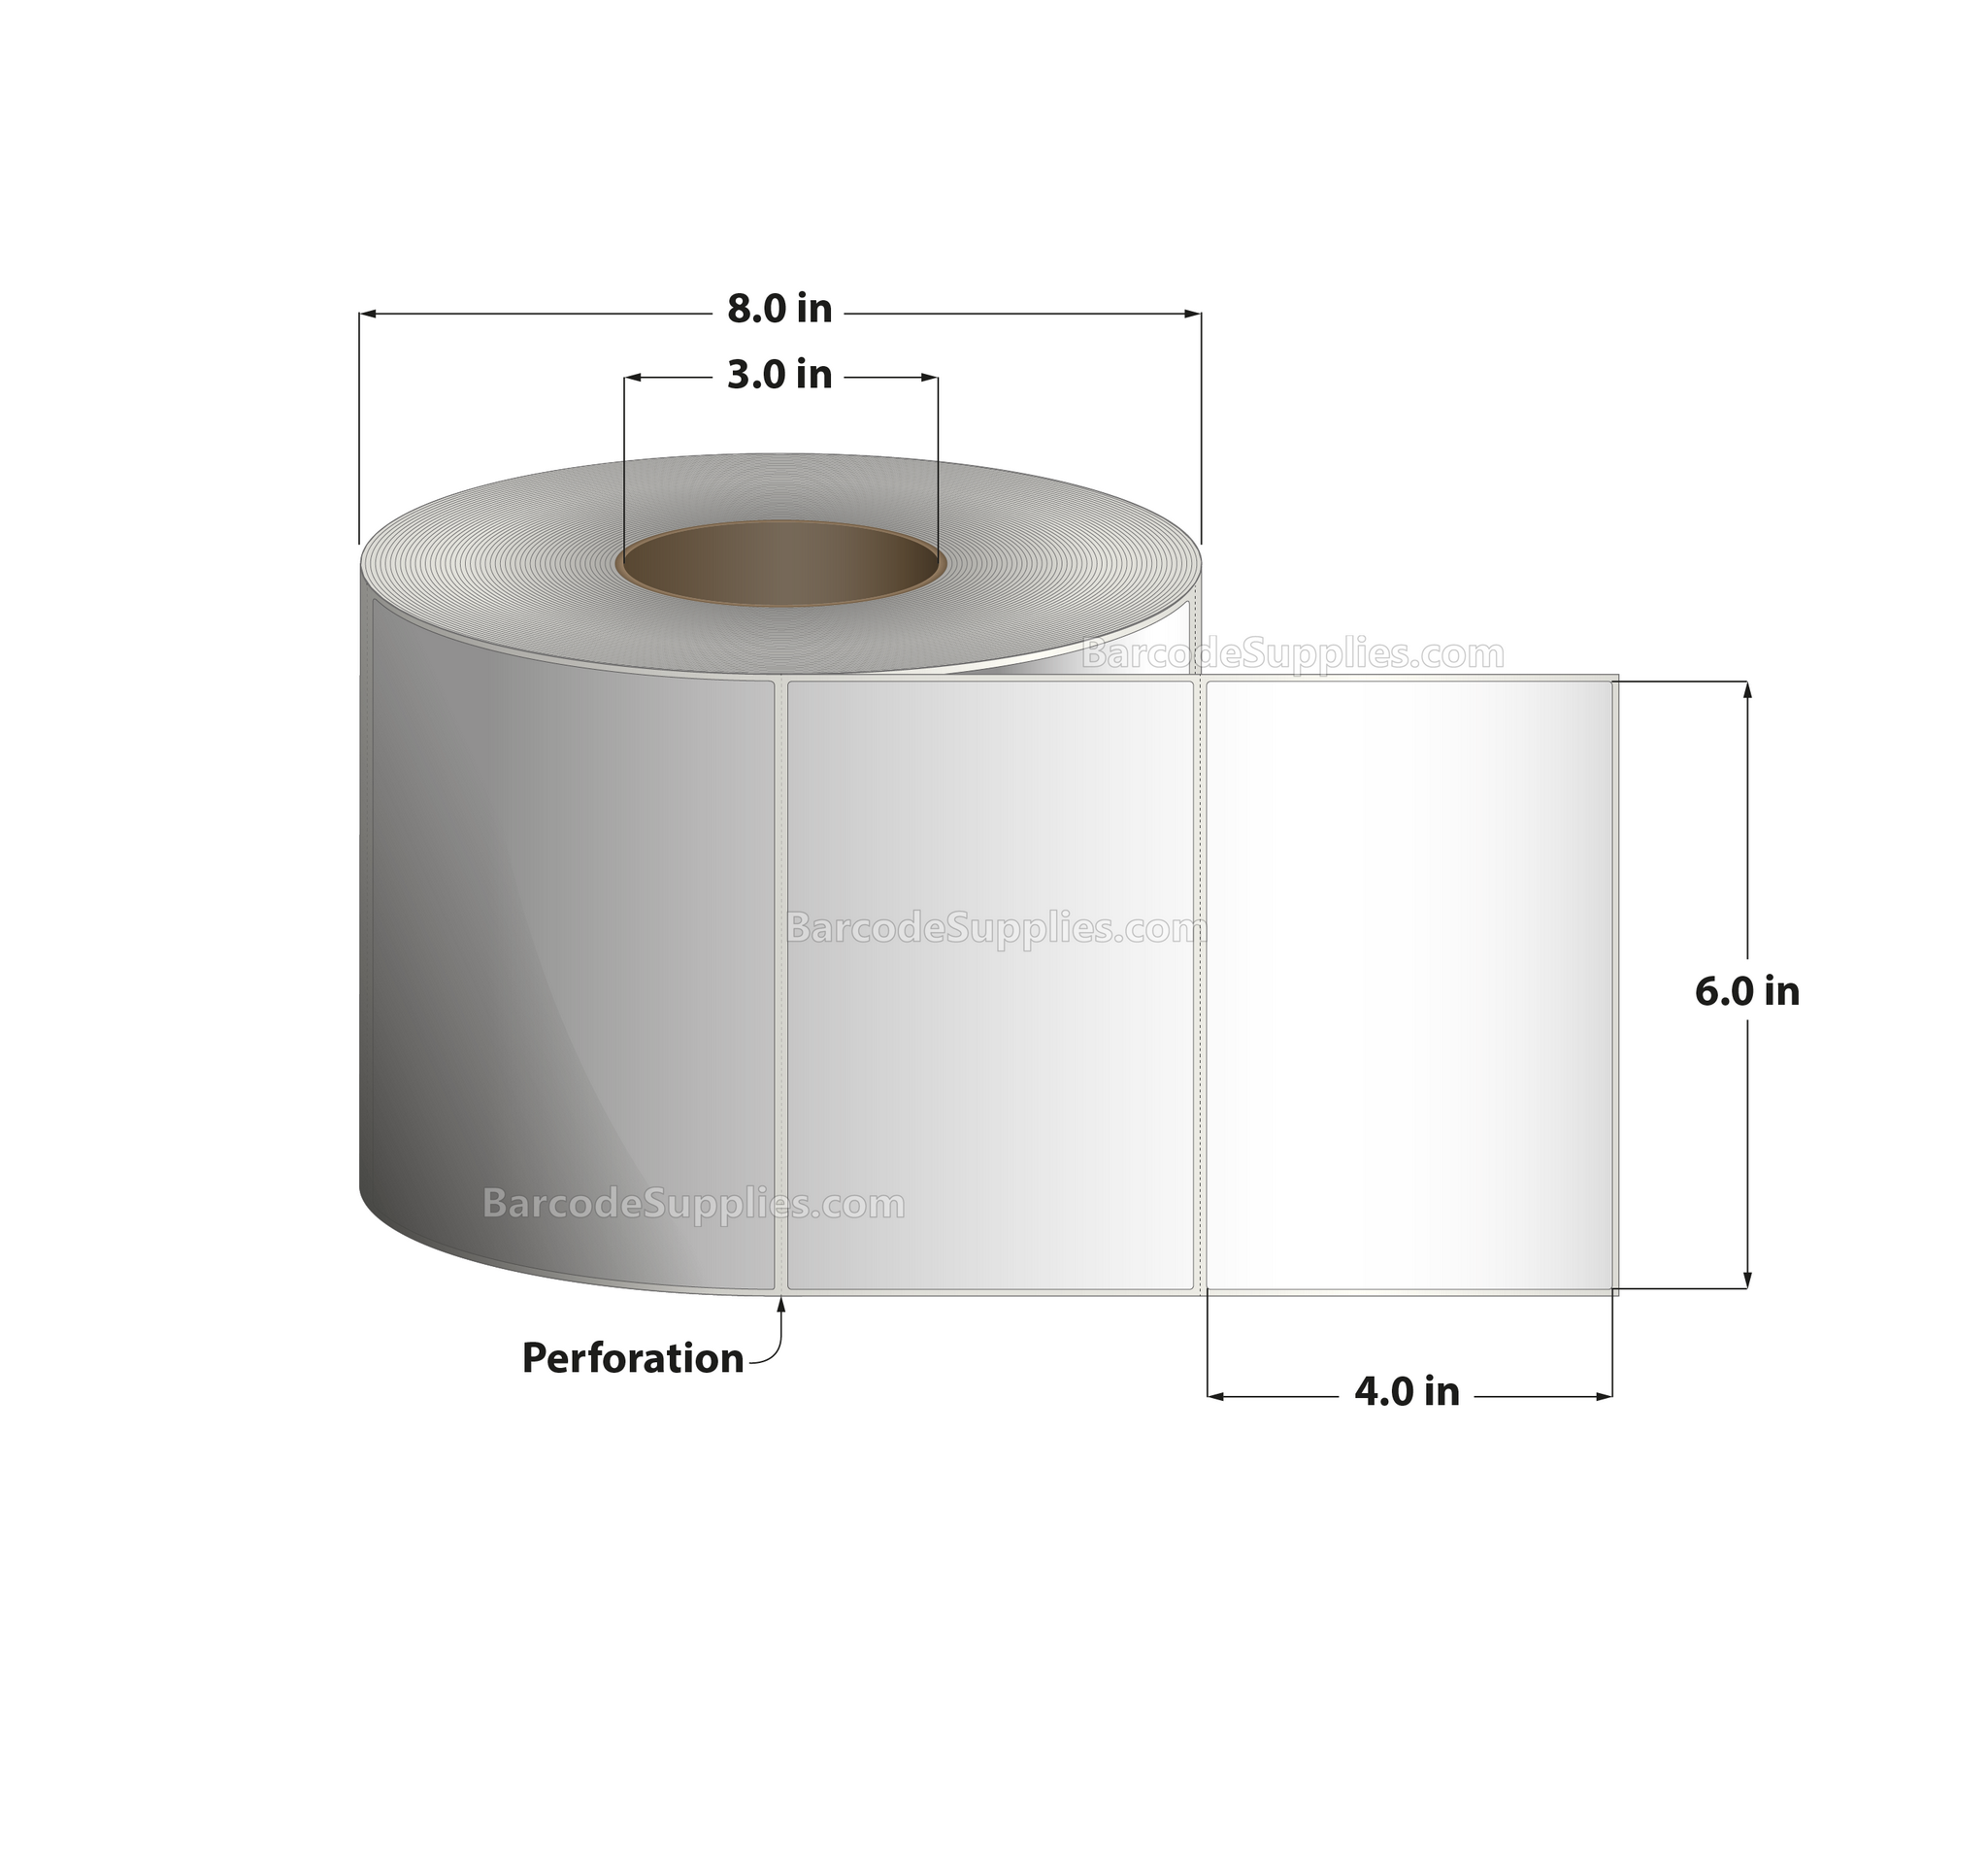 6 x 4 Thermal Transfer White Labels With Permanent Acrylic Adhesive - Perforated - 1500 Labels Per Roll - Carton Of 4 Rolls - 6000 Labels Total - MPN: TH64-1P